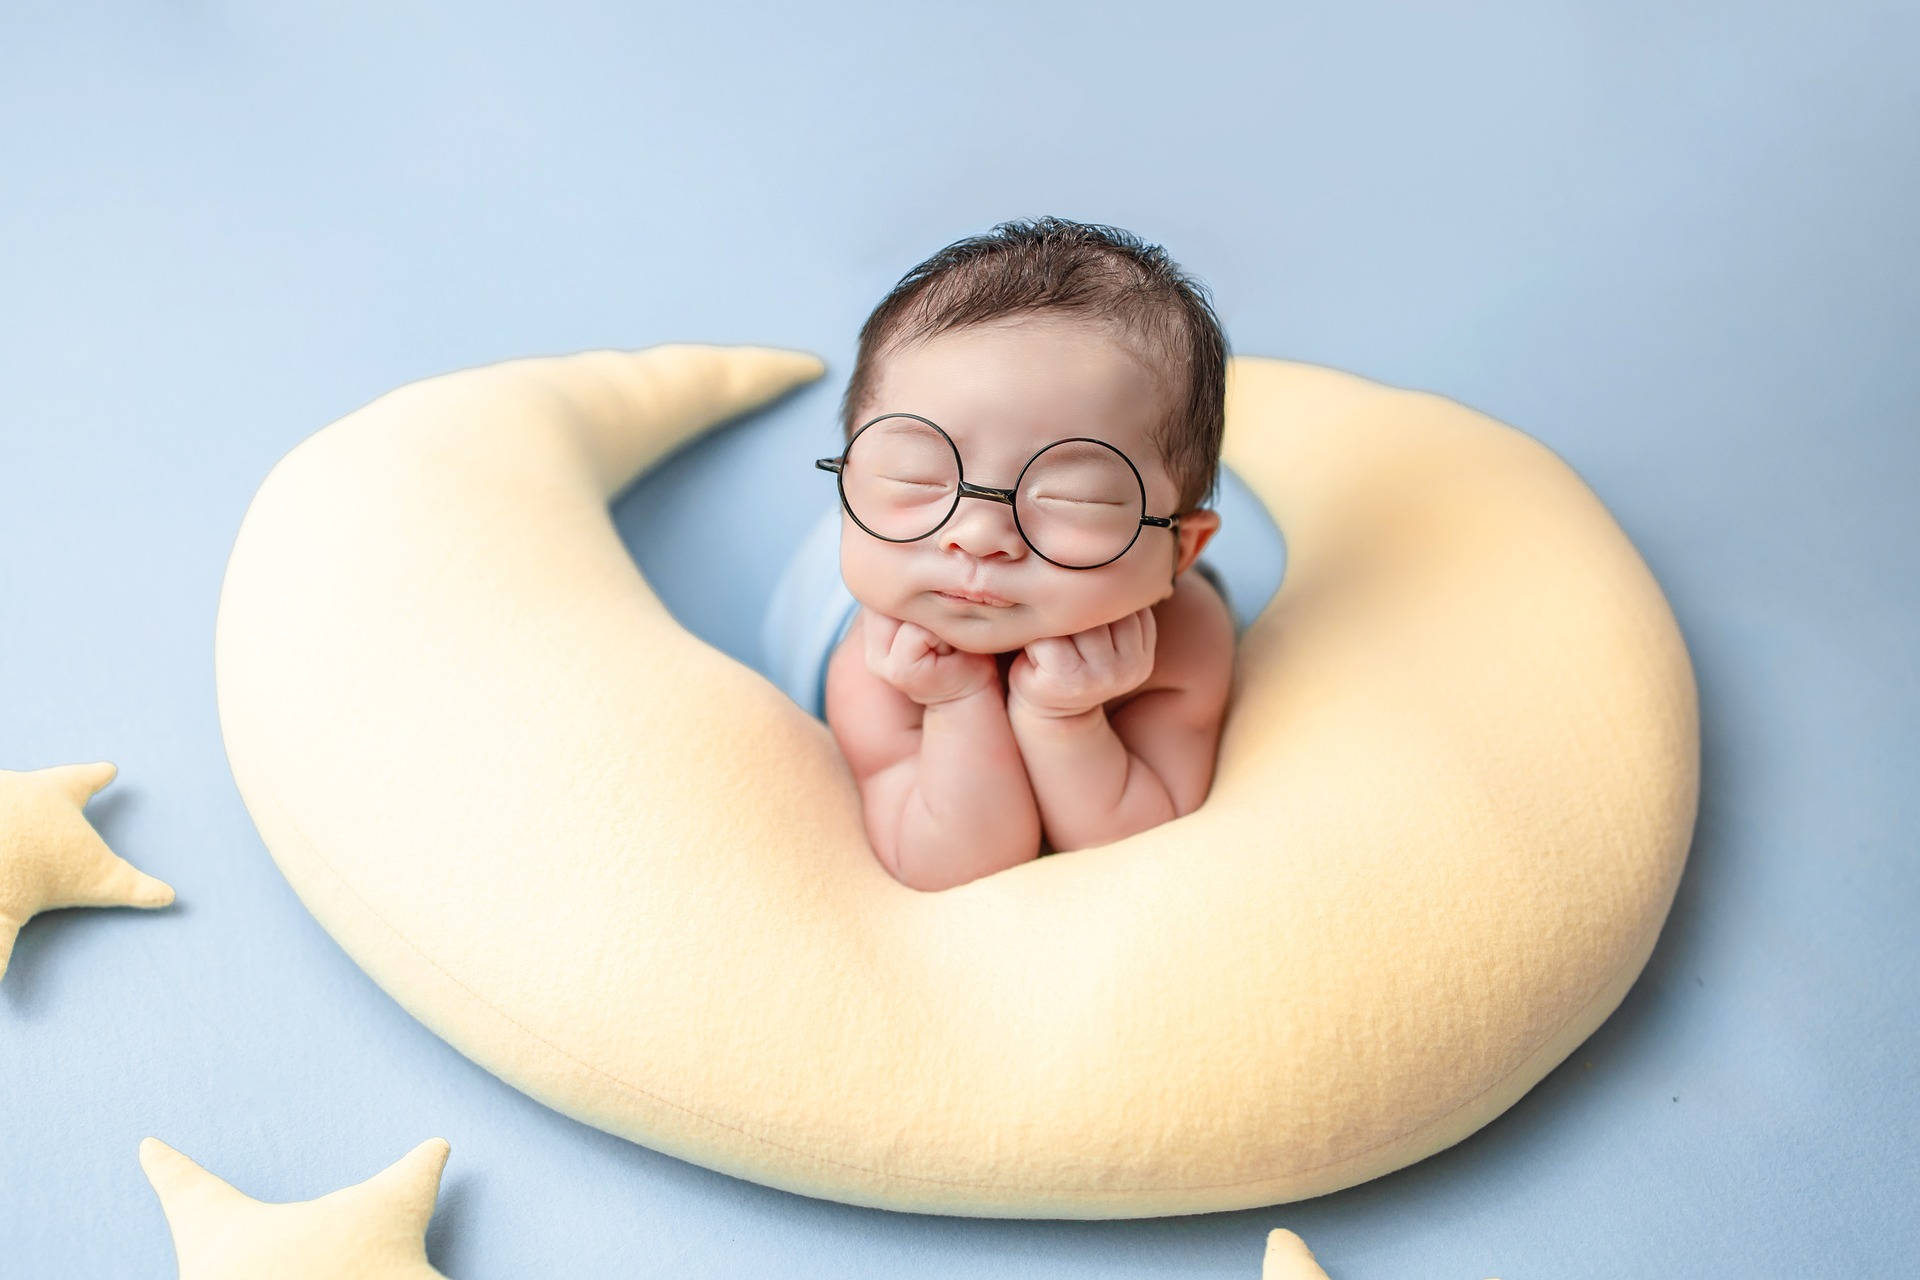 Very Cute Baby On Moon Pillow Wallpaper